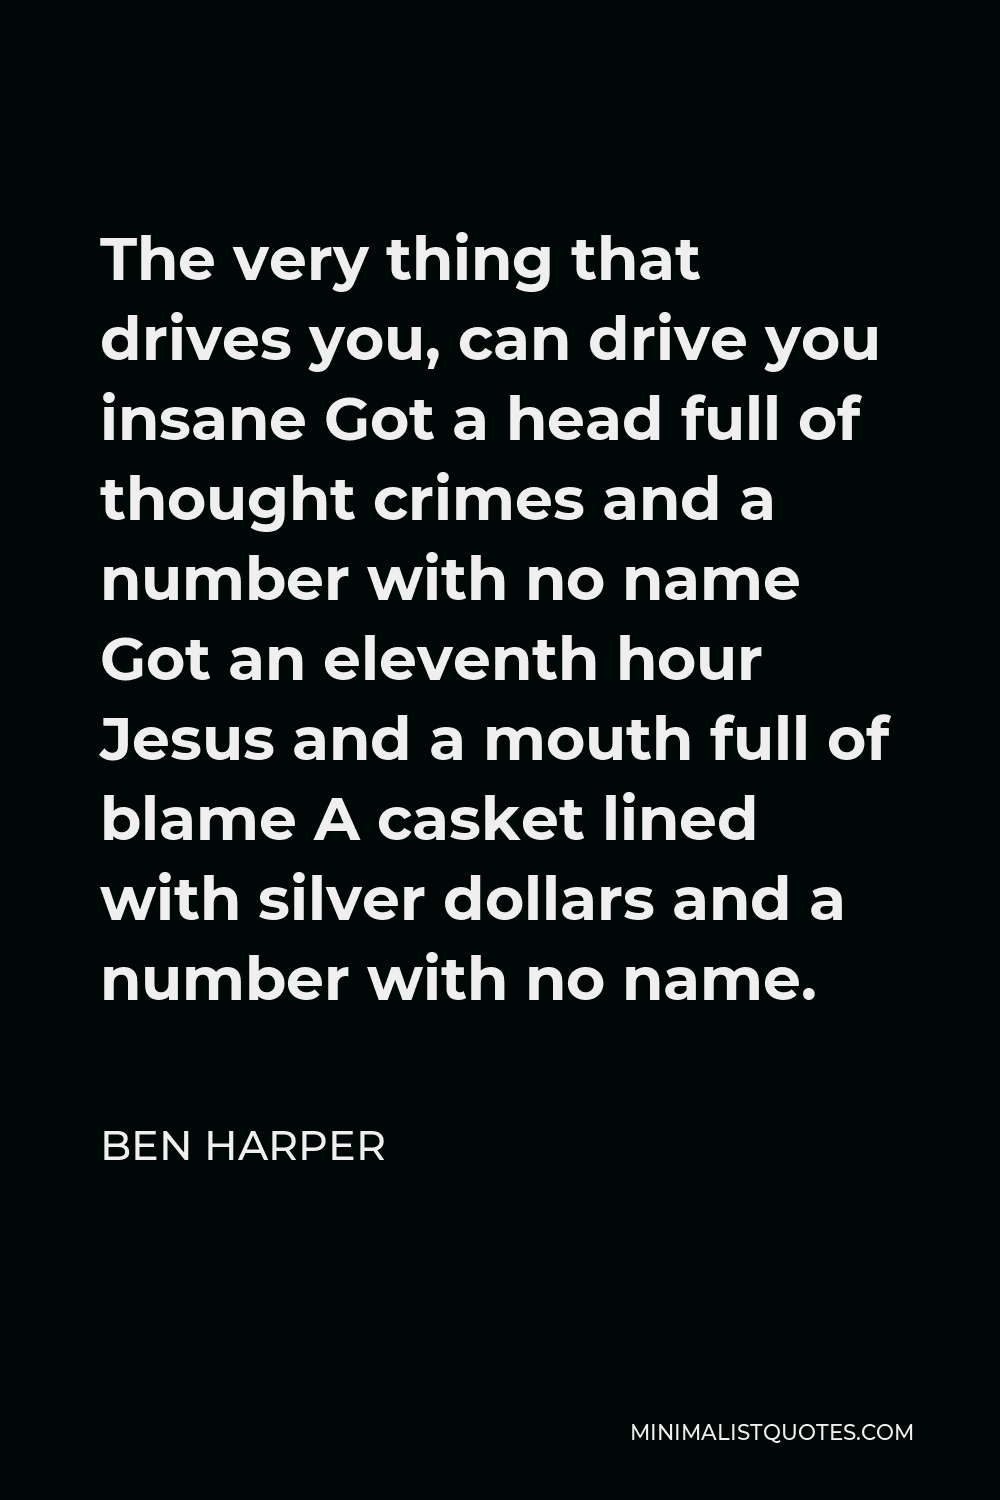 Ben Harper Quote - The very thing that drives you, can drive you insane Got a head full of thought crimes and a number with no name Got an eleventh hour Jesus and a mouth full of blame A casket lined with silver dollars and a number with no name.